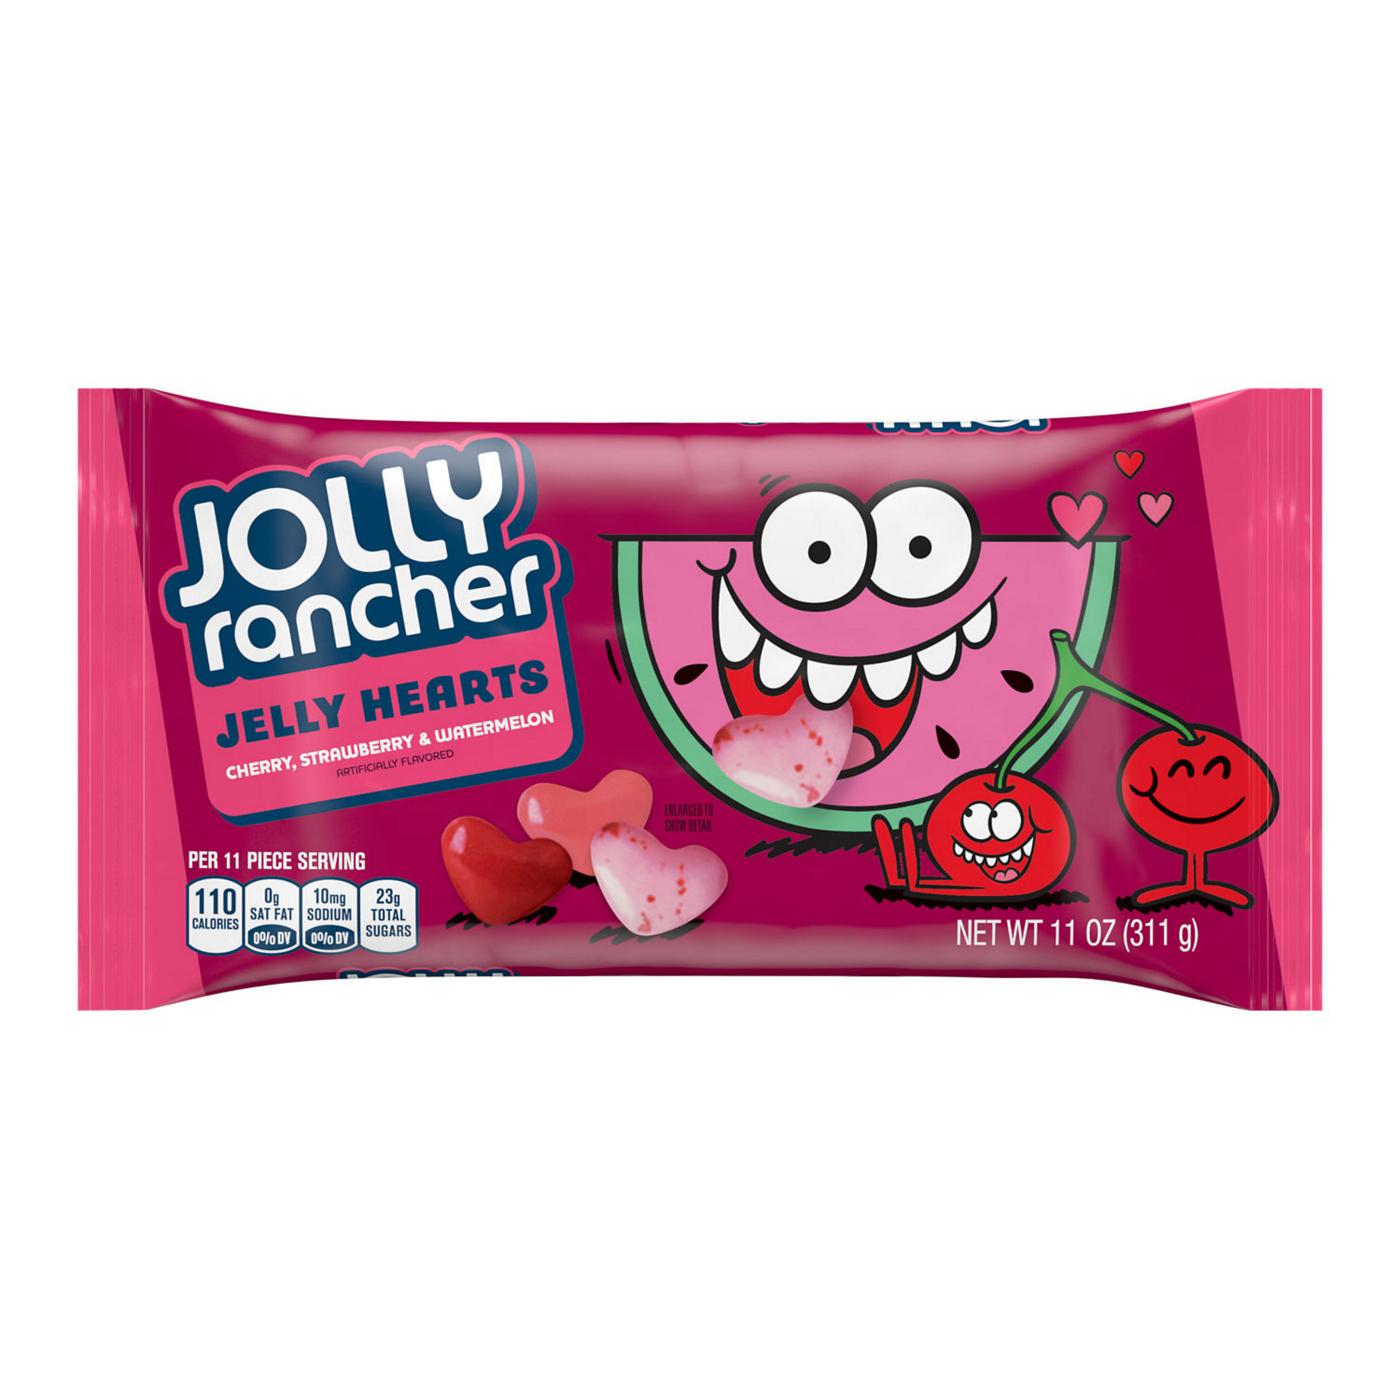 Jolly Rancher Jelly Hearts Valentine's Candy; image 1 of 7